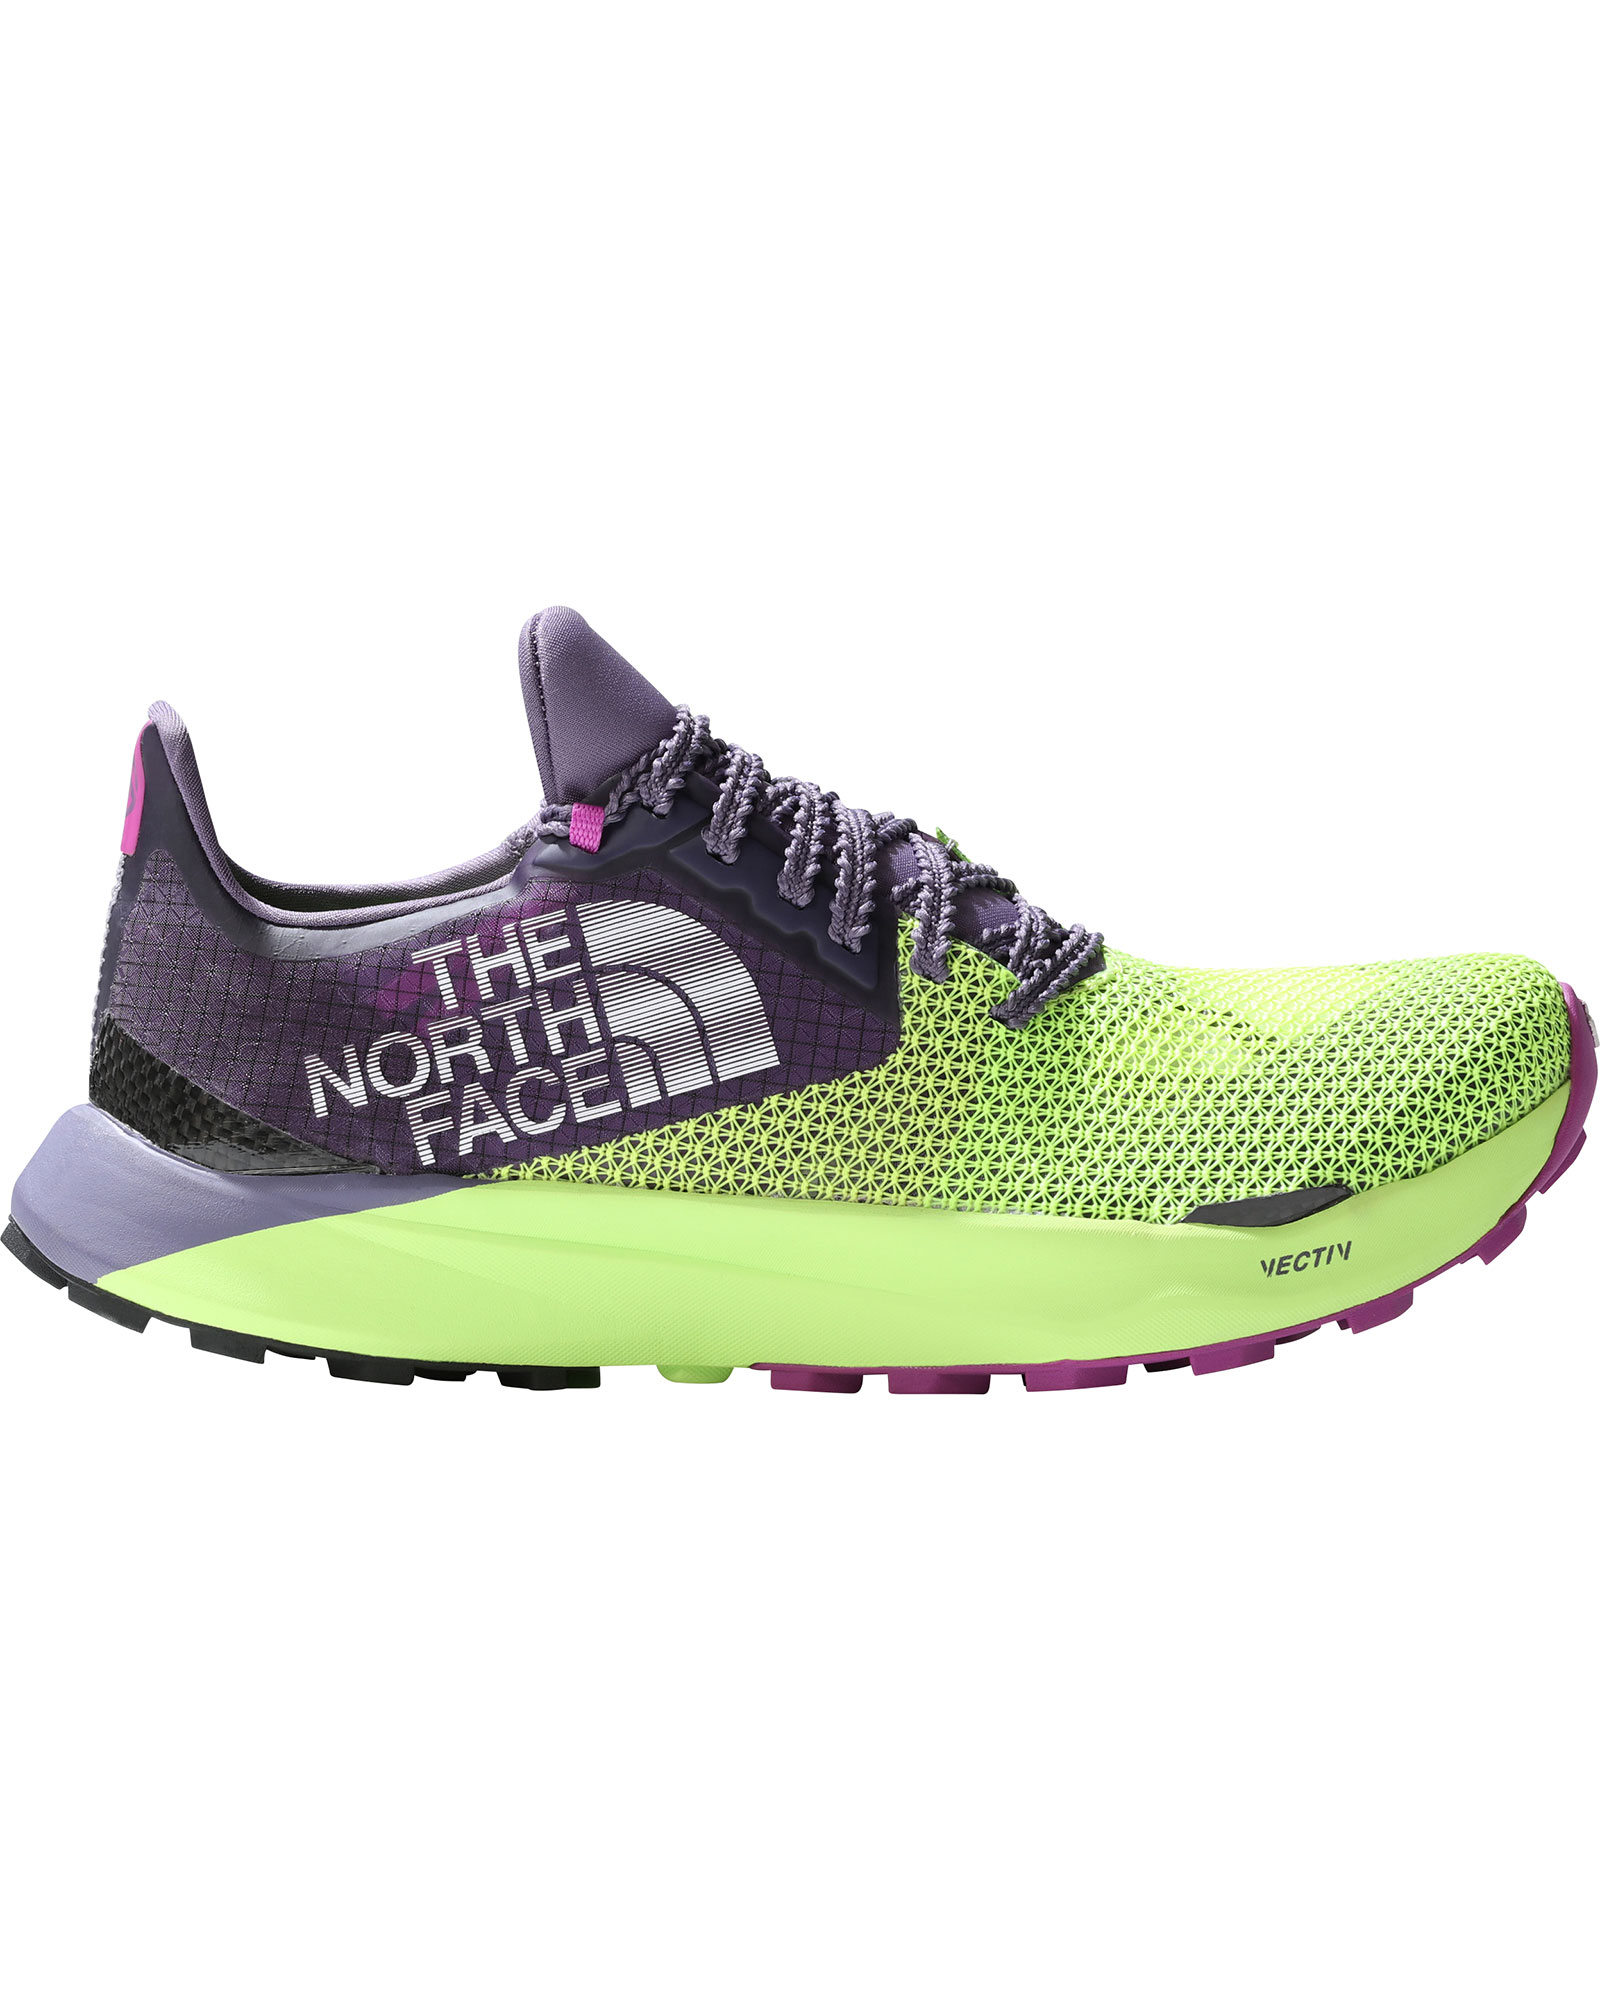 The North Face Summit Vectiv Sky Women's Trail Shoes 0